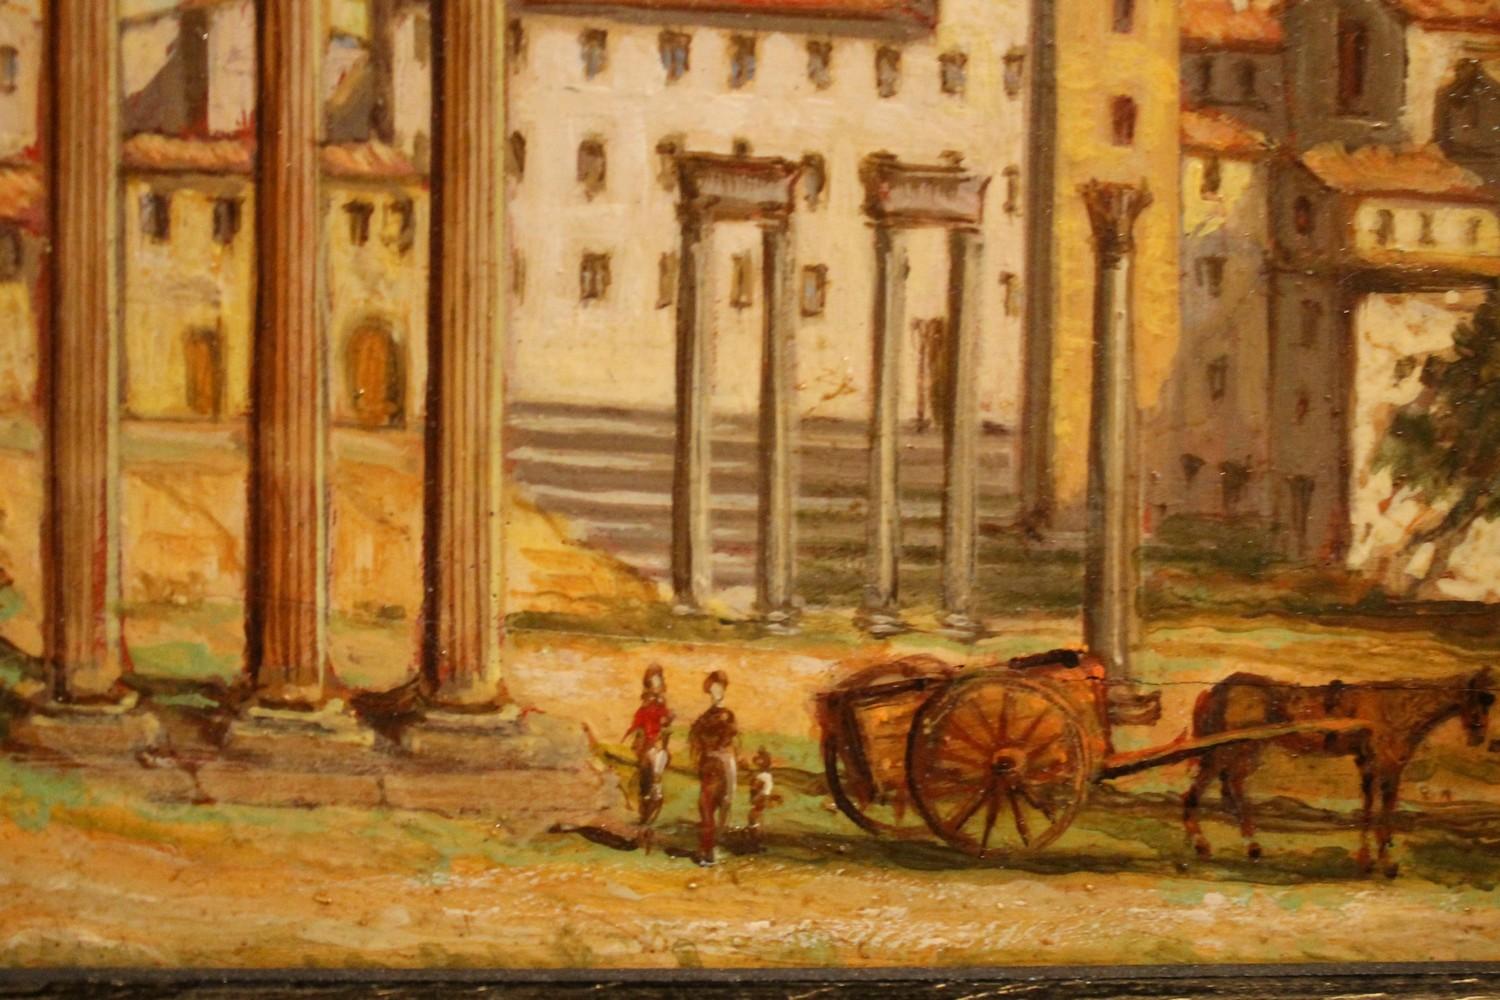 This enchanting landscape oil on wood board painting depicts one of the most famous views of the city of Rome. The imperial forums, a large square where you can still admire the ruins of some important classical temples and buildings of ancient